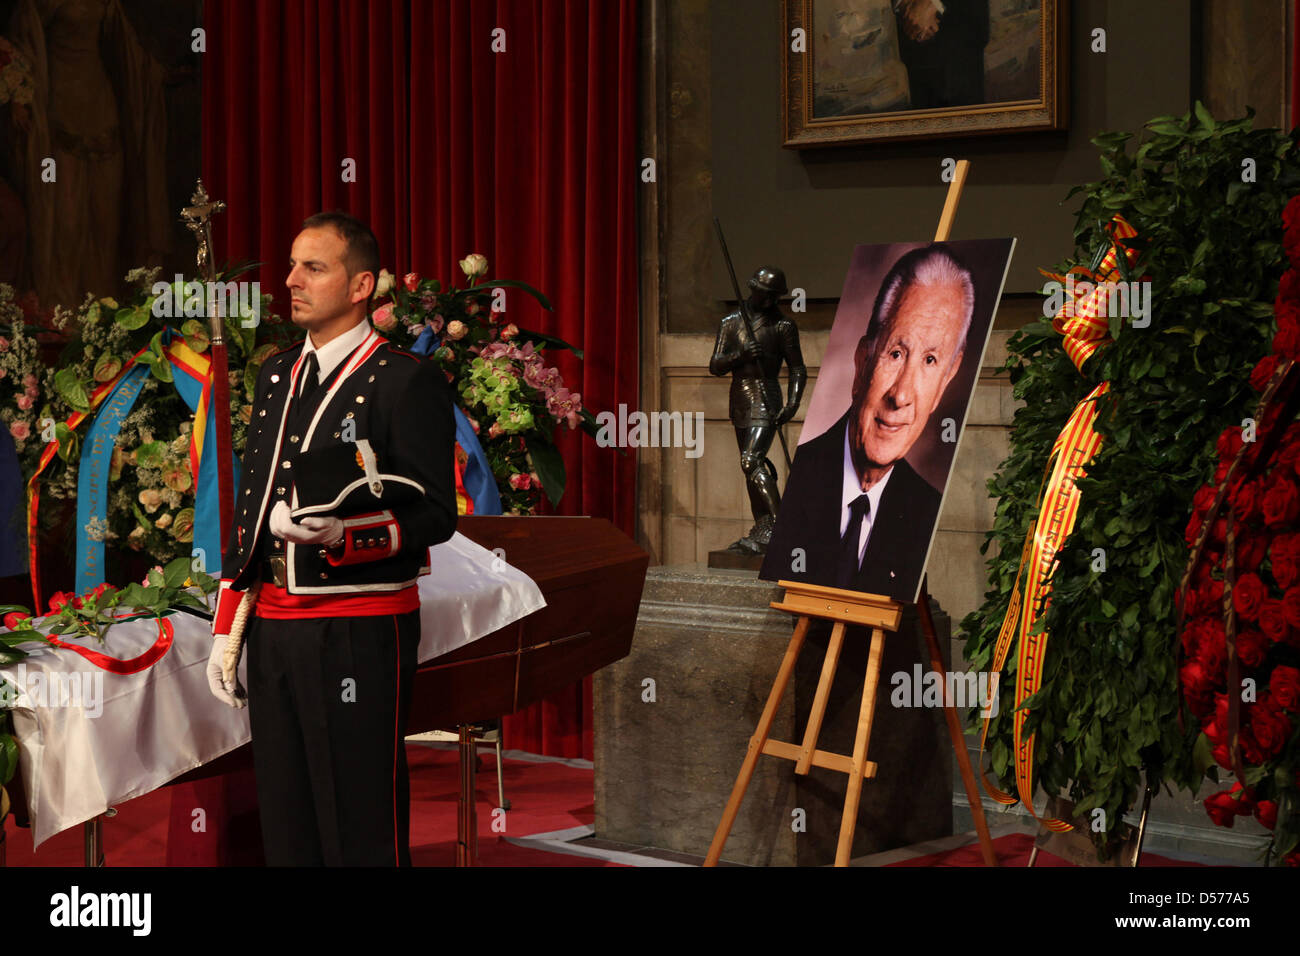 The funeral chapel of former IOC president Juan Antonio Samaranch set up at the Palau de la Generalitat in Barcelona, Spain, 22 April 2010. Samaranch, who headed the IOC from 1980 to 2001, died on 21 April at the age of 89 due to heart failure. He retired as the second-longest serving president in the history of the IOC. Photo: Nicola Mesken Stock Photo